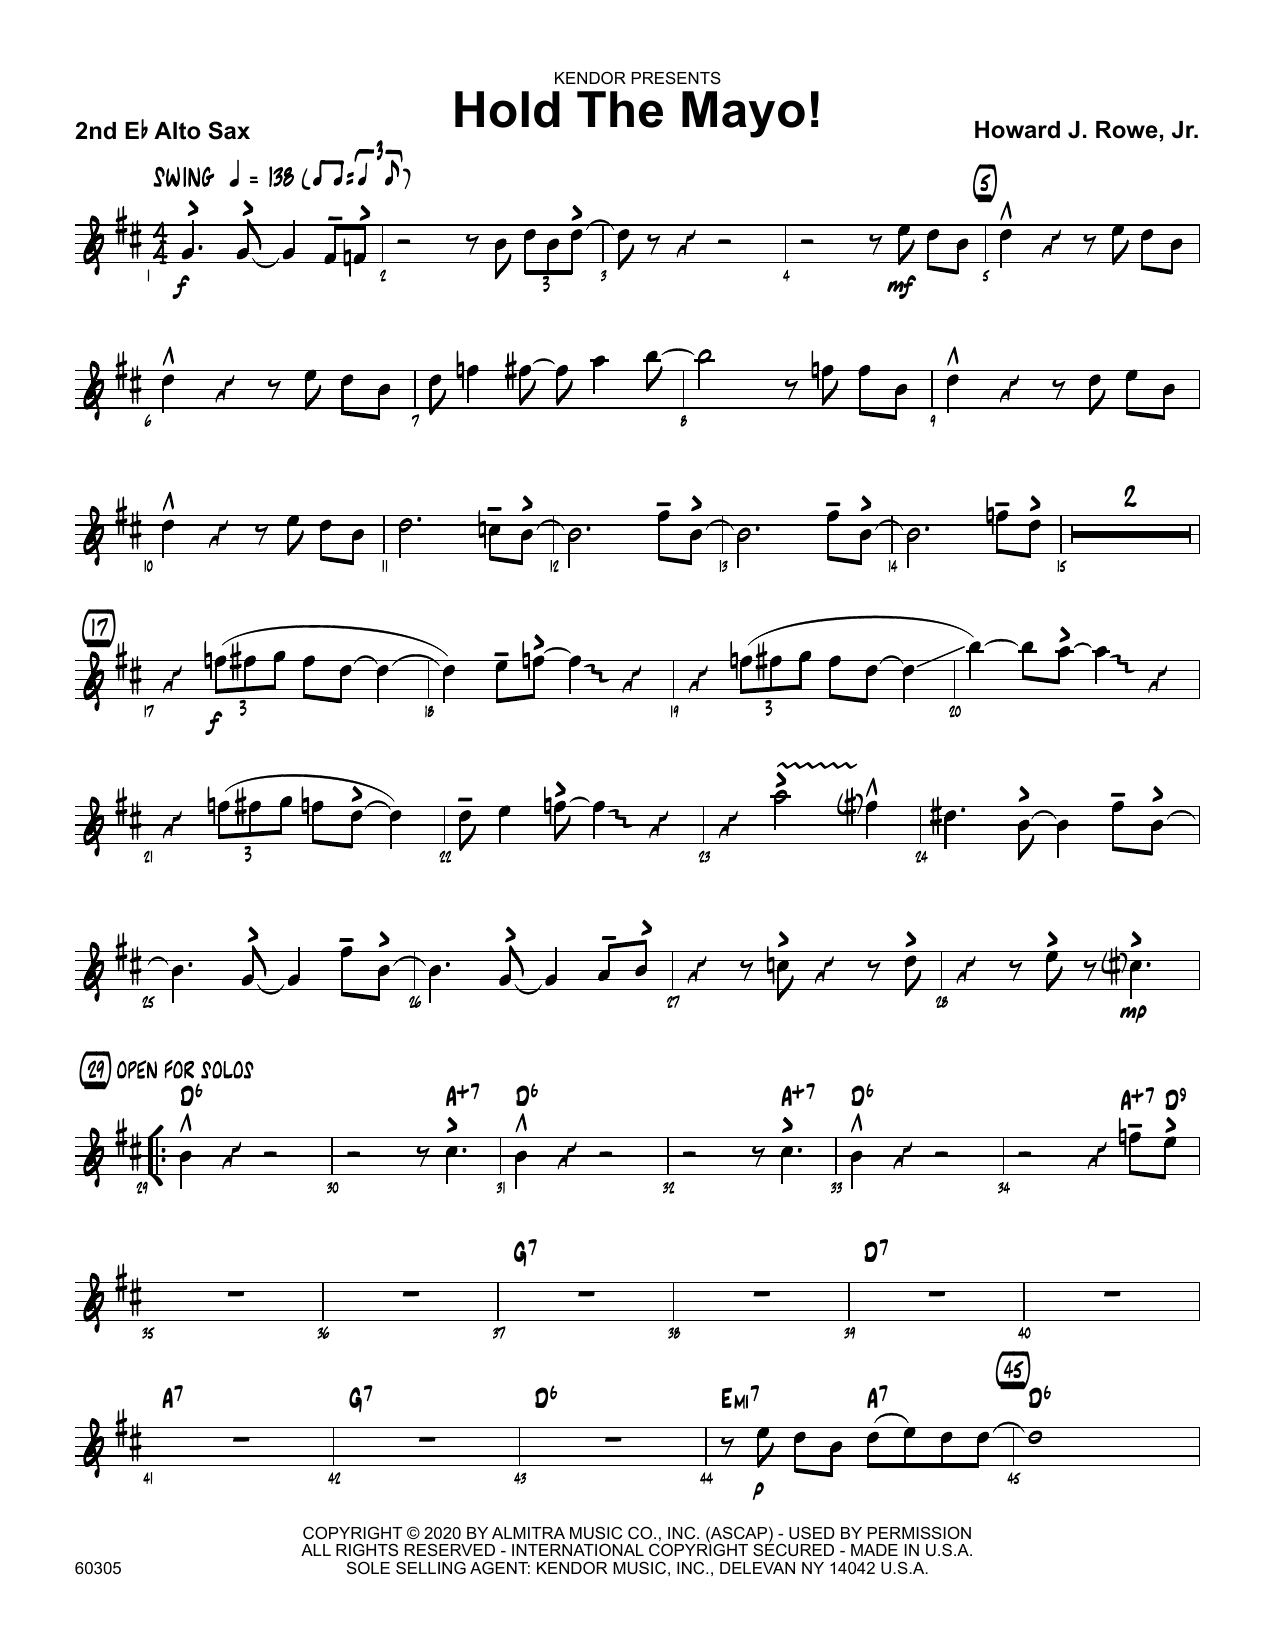 Download Howard Rowe Hold The Mayo! - 2nd Eb Alto Saxophone Sheet Music